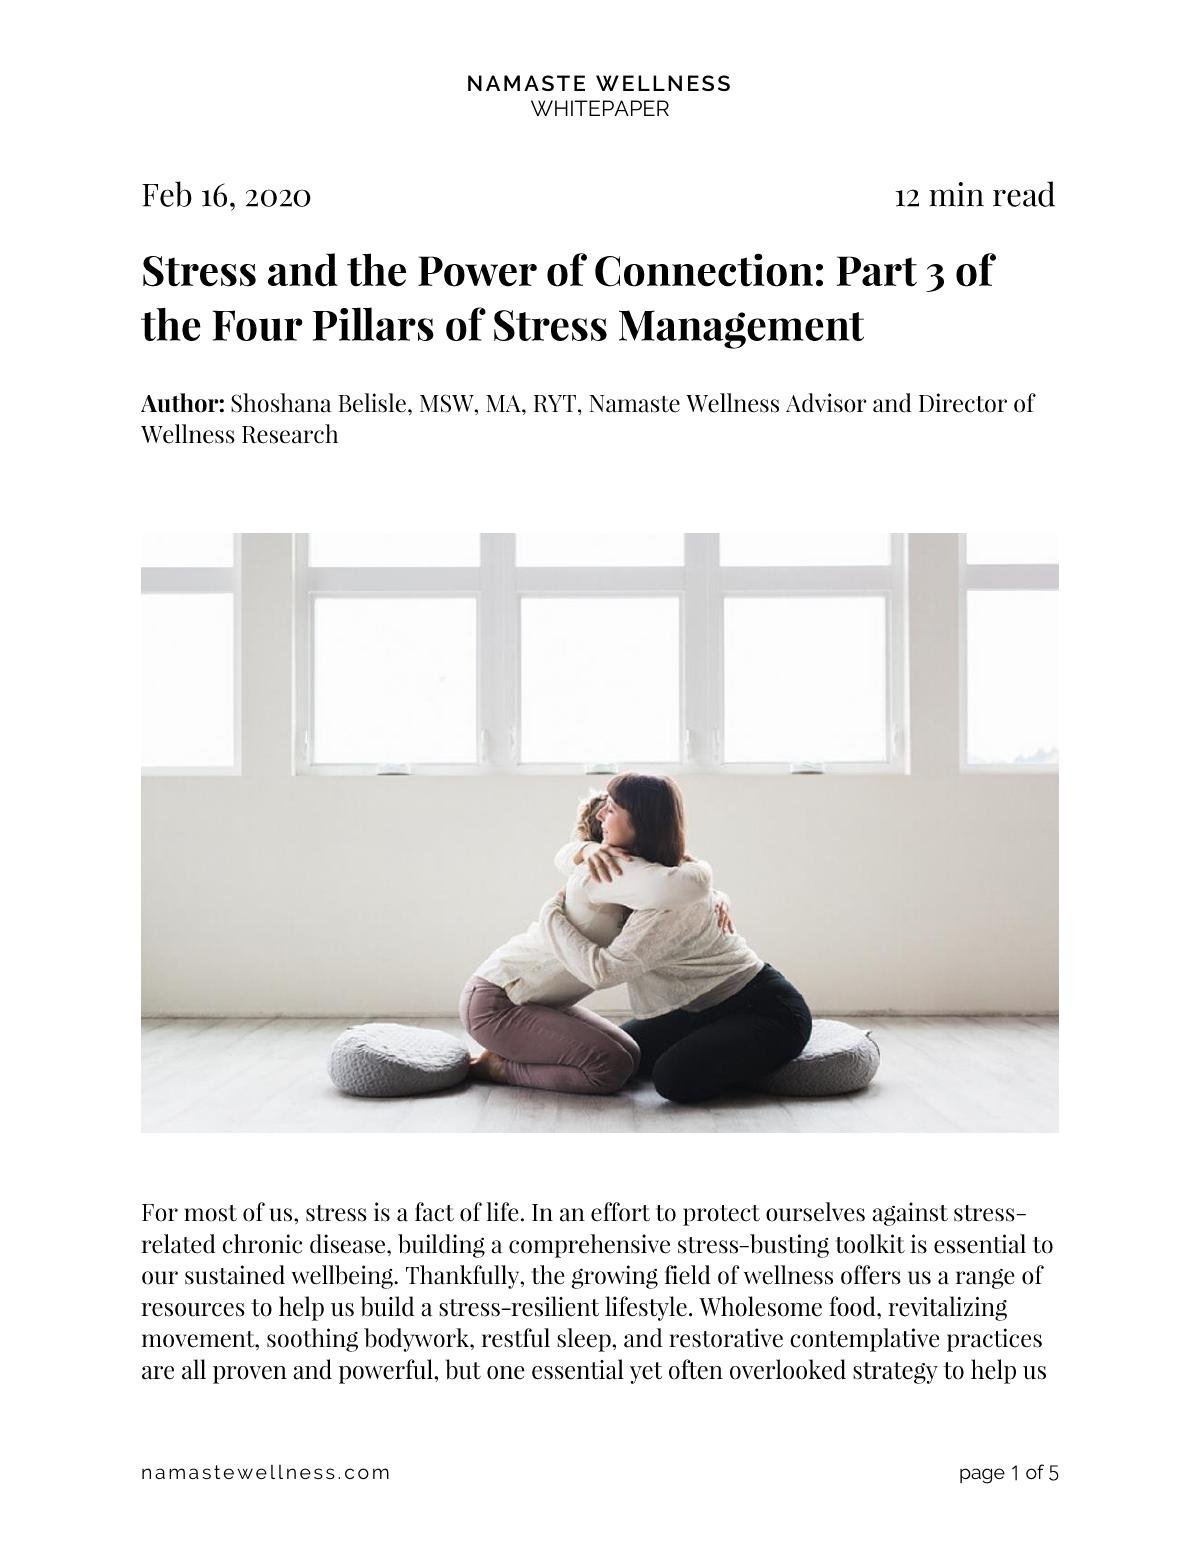 Part 3 of the Four Pillars of Stress Management - Connection